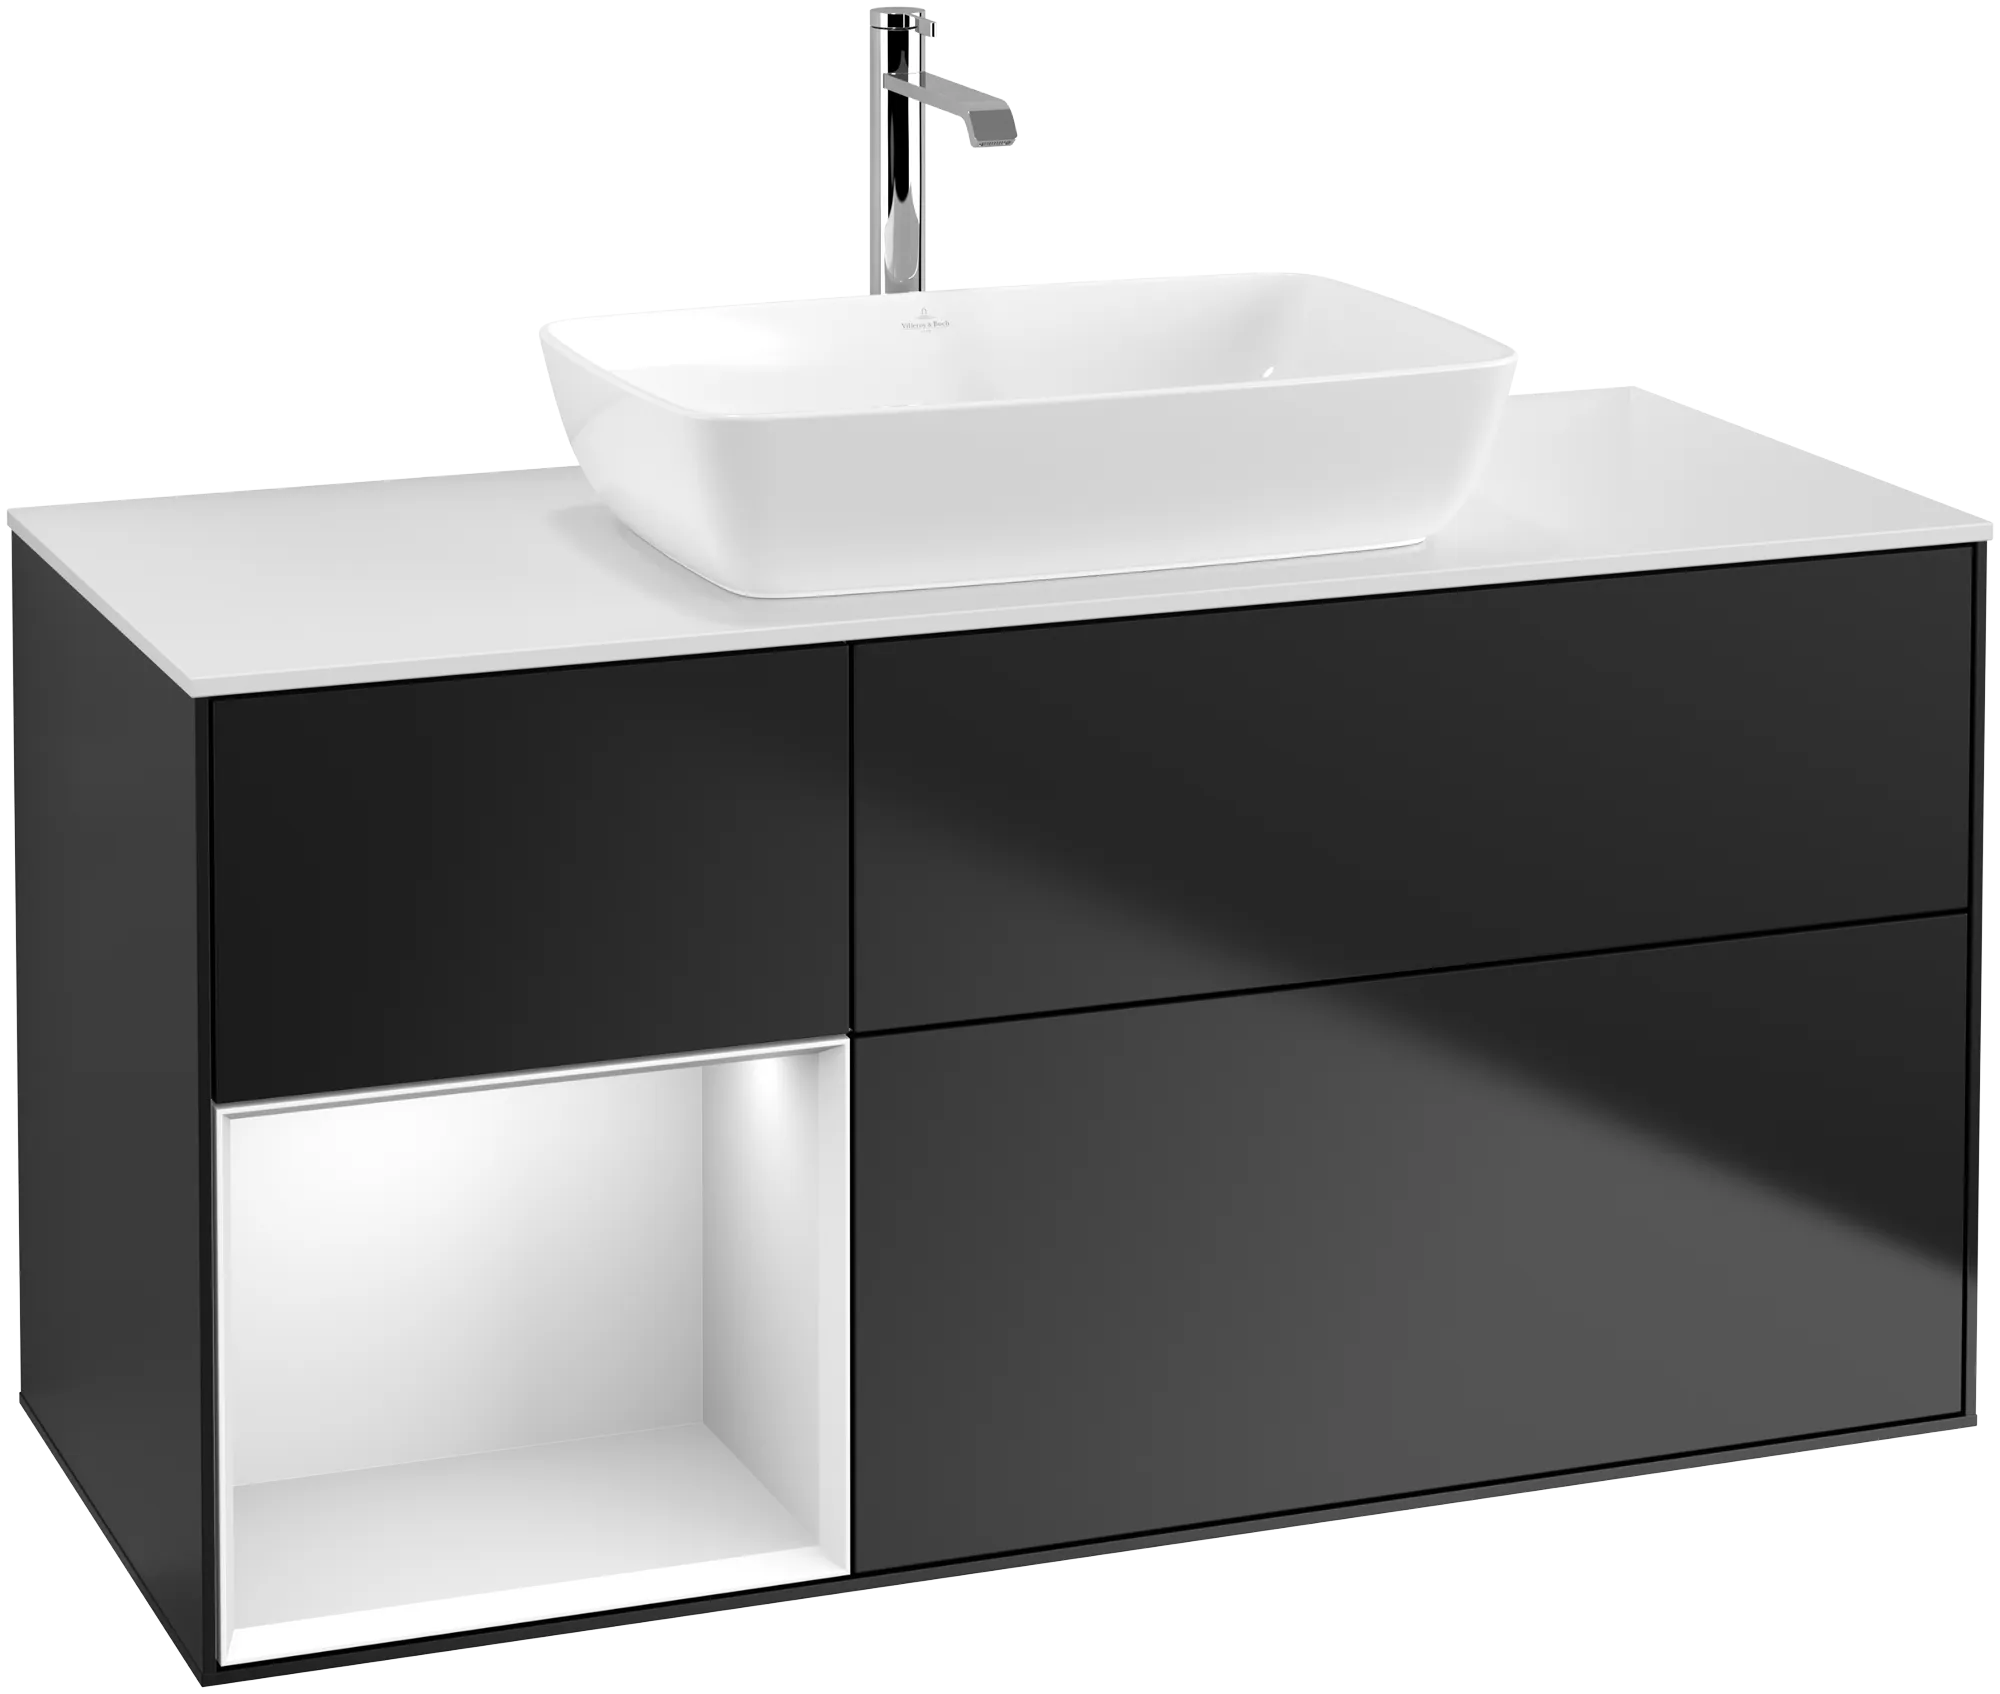 Picture of VILLEROY BOCH Finion Vanity unit, with lighting, 3 pull-out compartments, 1200 x 603 x 501 mm, Black Matt Lacquer / White Matt Lacquer / Glass White Matt #G821MTPD